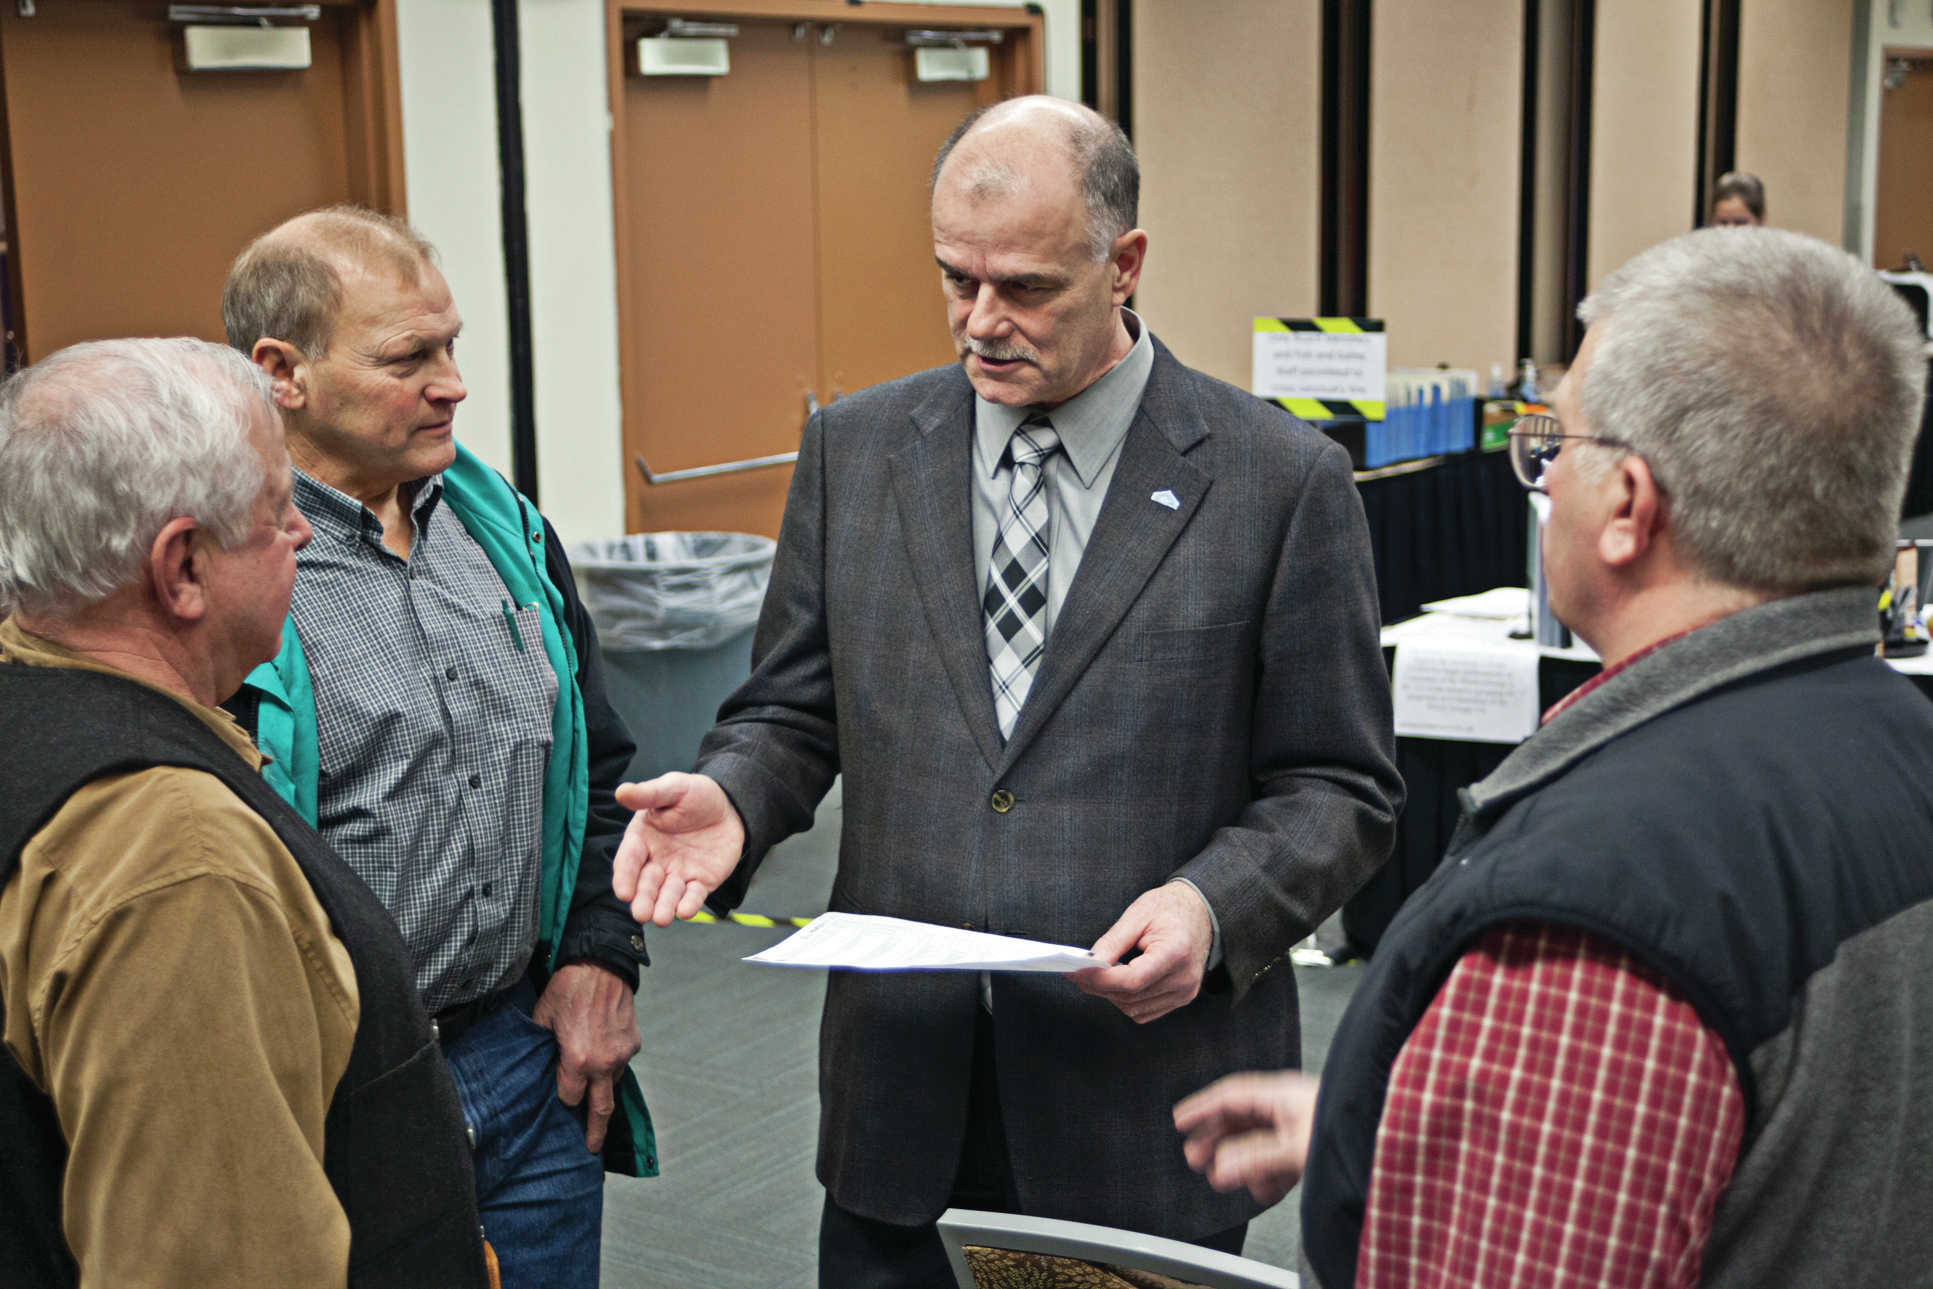 At left, Roland Maw and Dave Martin, both from the United Cook Inlet Drift Association, talk with Board of Fisheries member John Jensen, center, and Bruce Gabrys, a commercial drift fisherman, during the 2014 Upper Cook Inlet Board of Fisheries meeting in Anchorage. On Jan. 18, the state secured an indictment against Maw for 12 felonies and five misdemeanors alleging he illegally obtained Permanent Fund Dividends from 2009-14. (Photo/File/Peninsula Clarion)